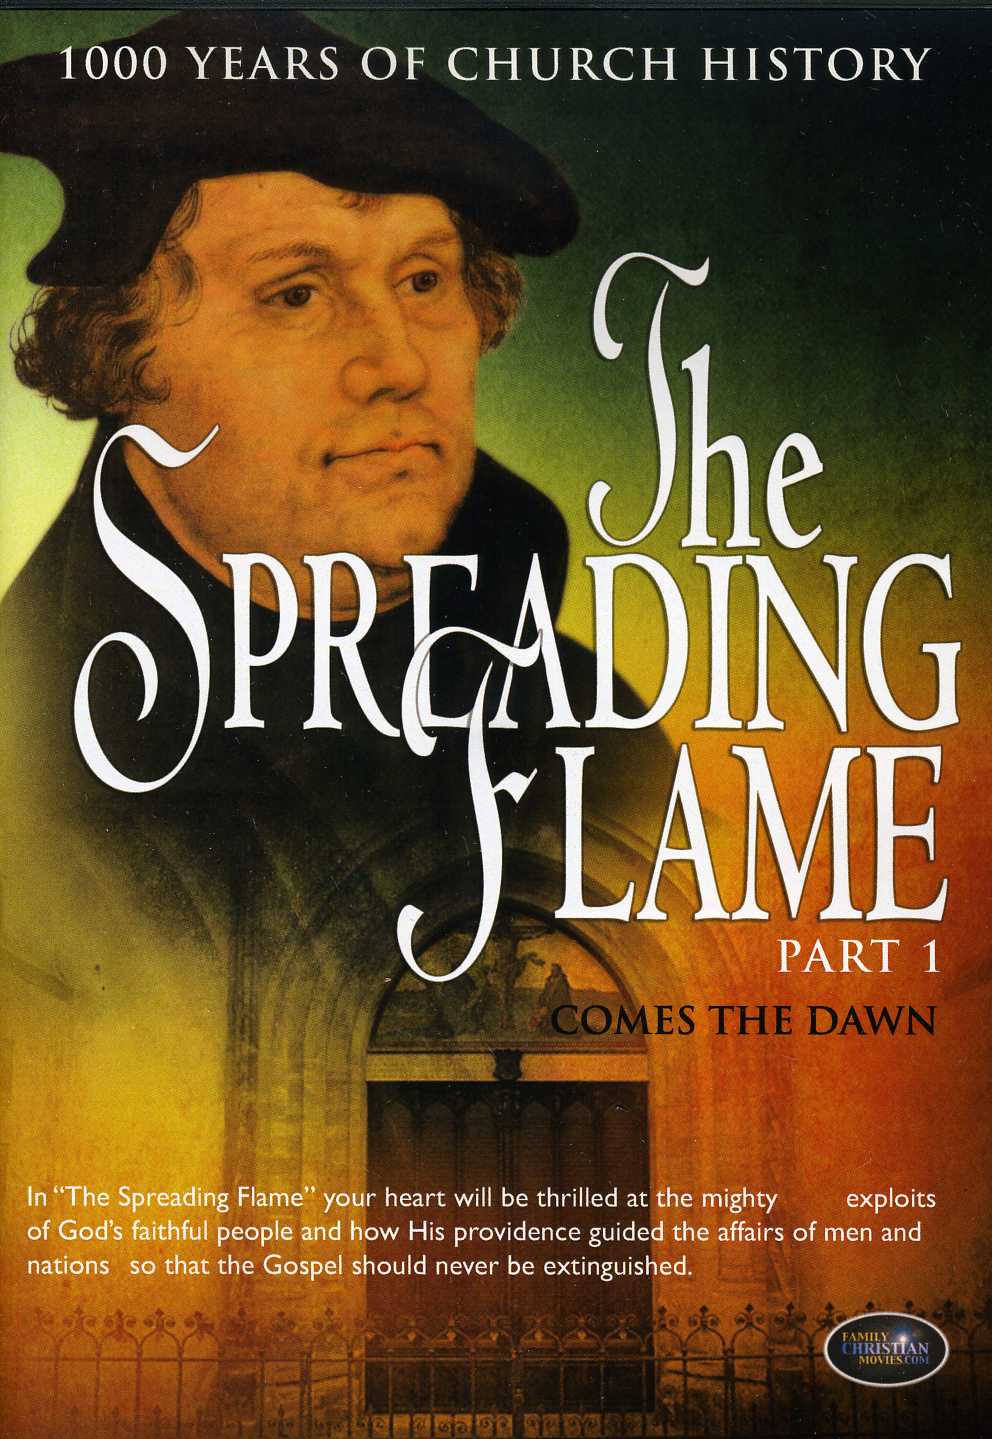 SPREADING FLAME 1: COMES THE DAWN